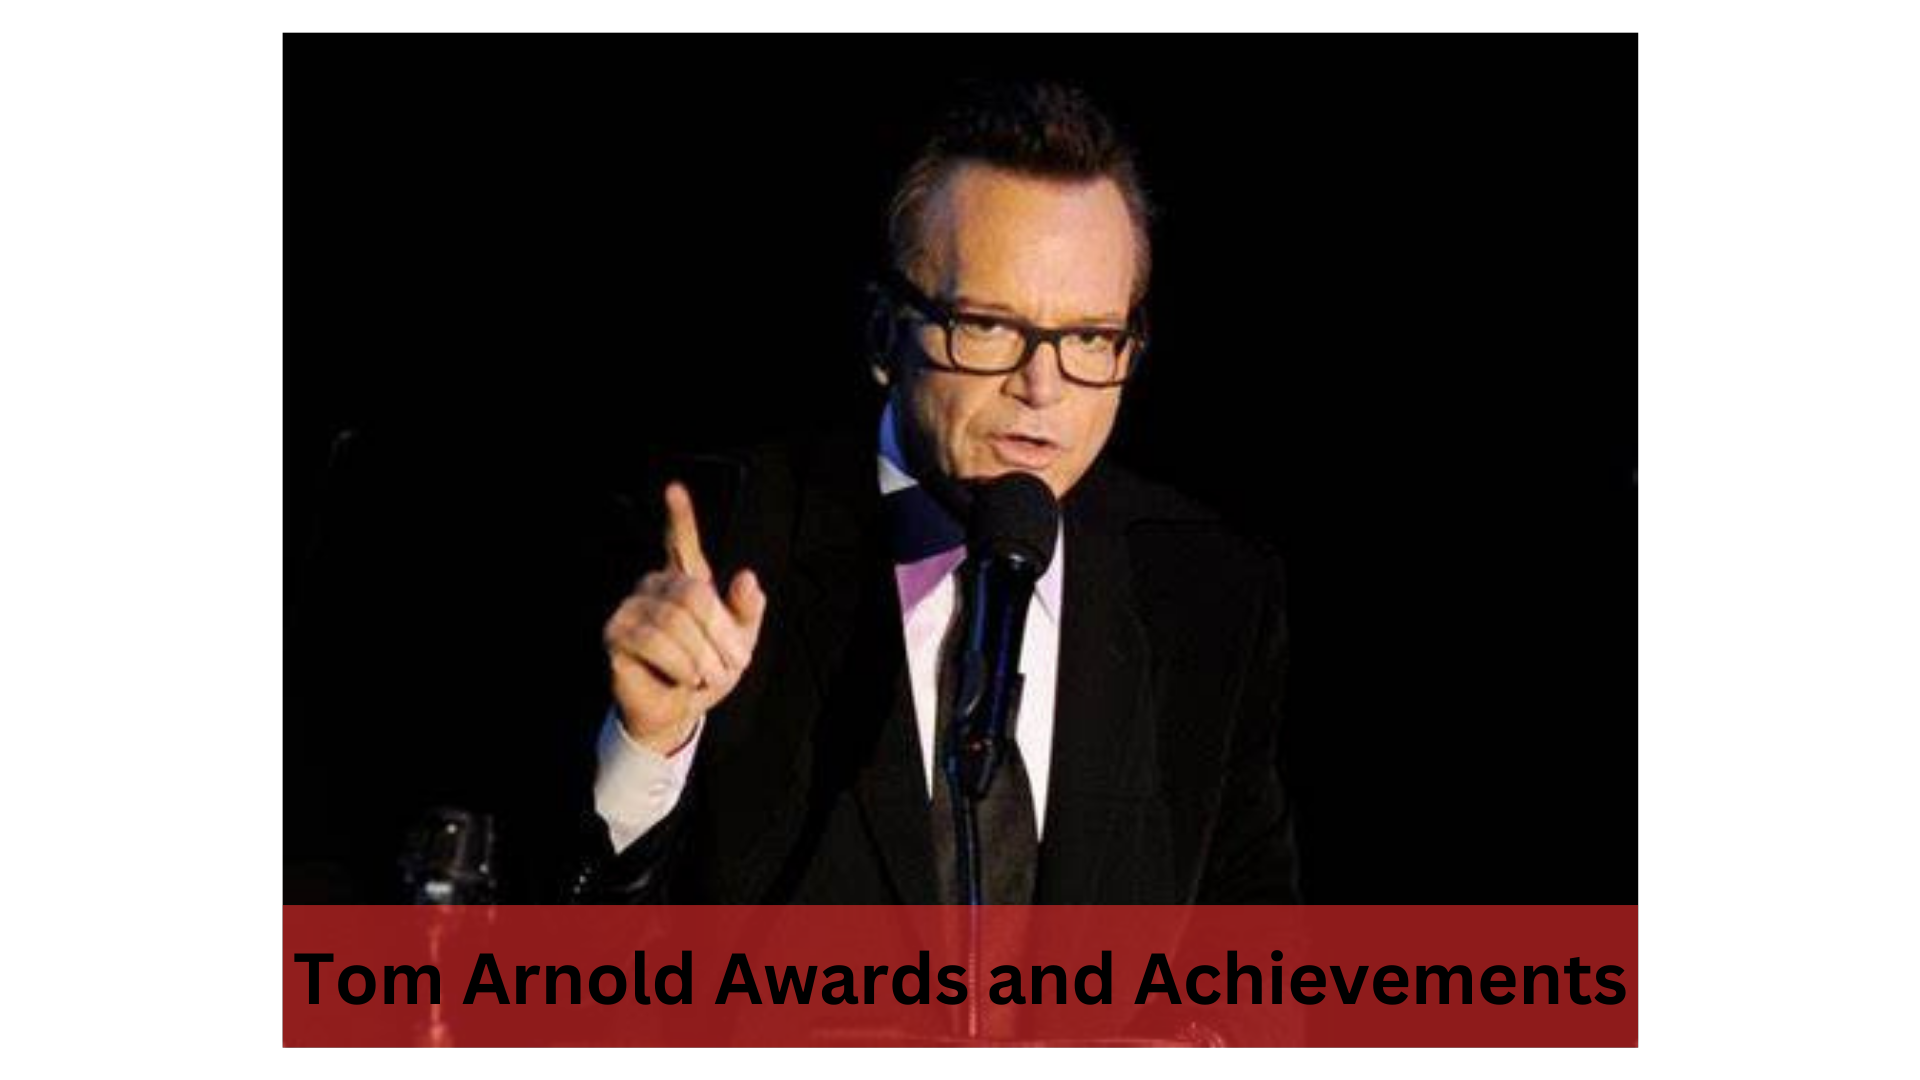 Tom Arnold Awards and Achievements